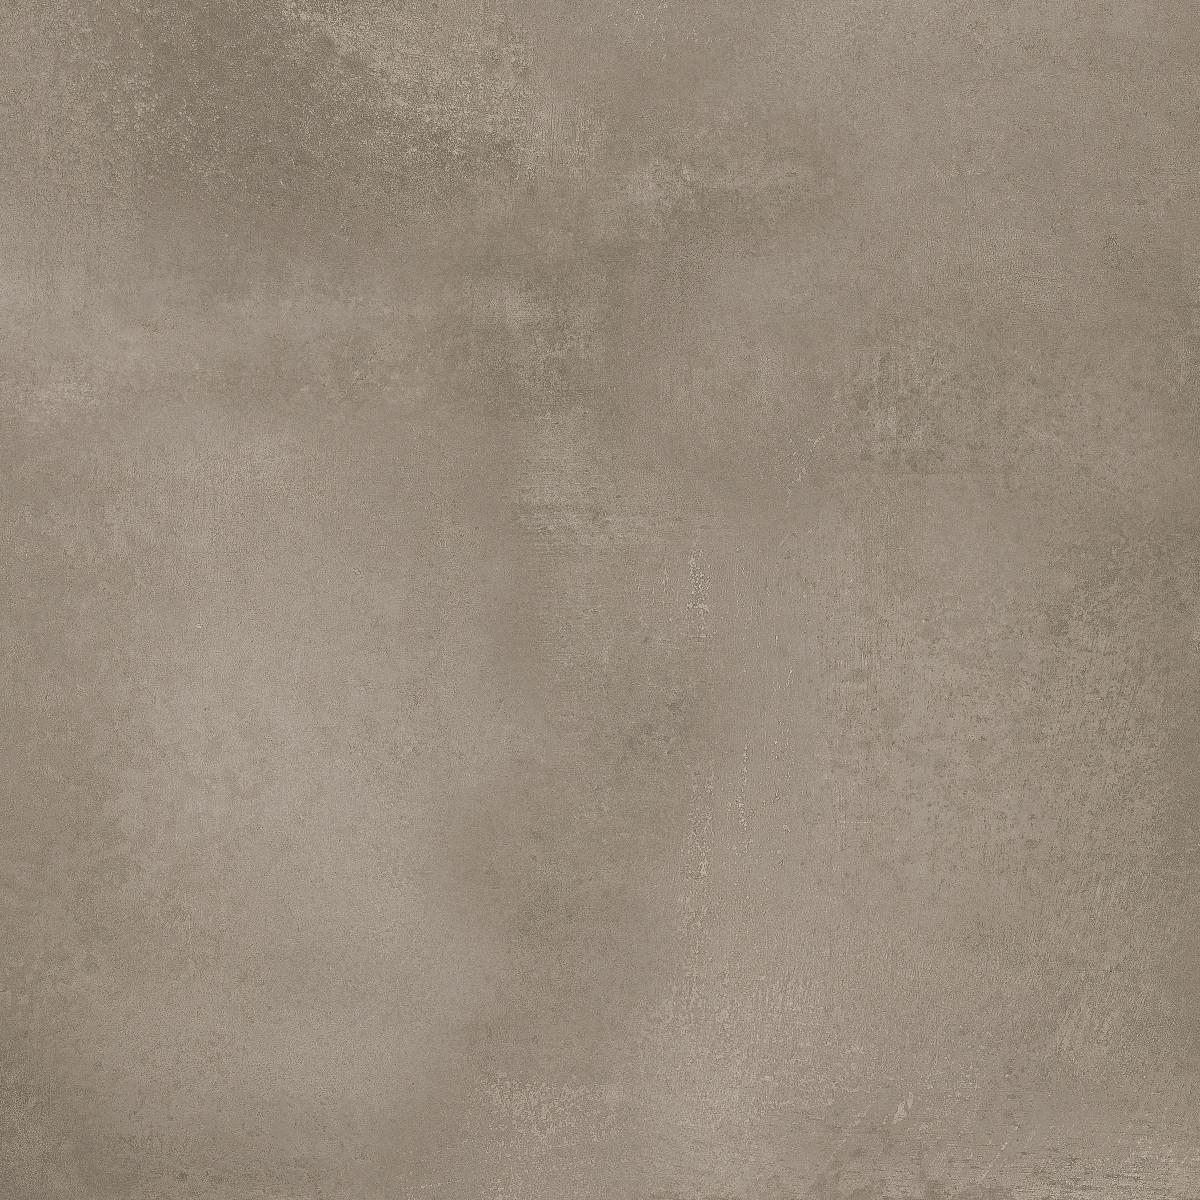 CEMENT GREY RECT. 60X60 - 1.44 m² - 5